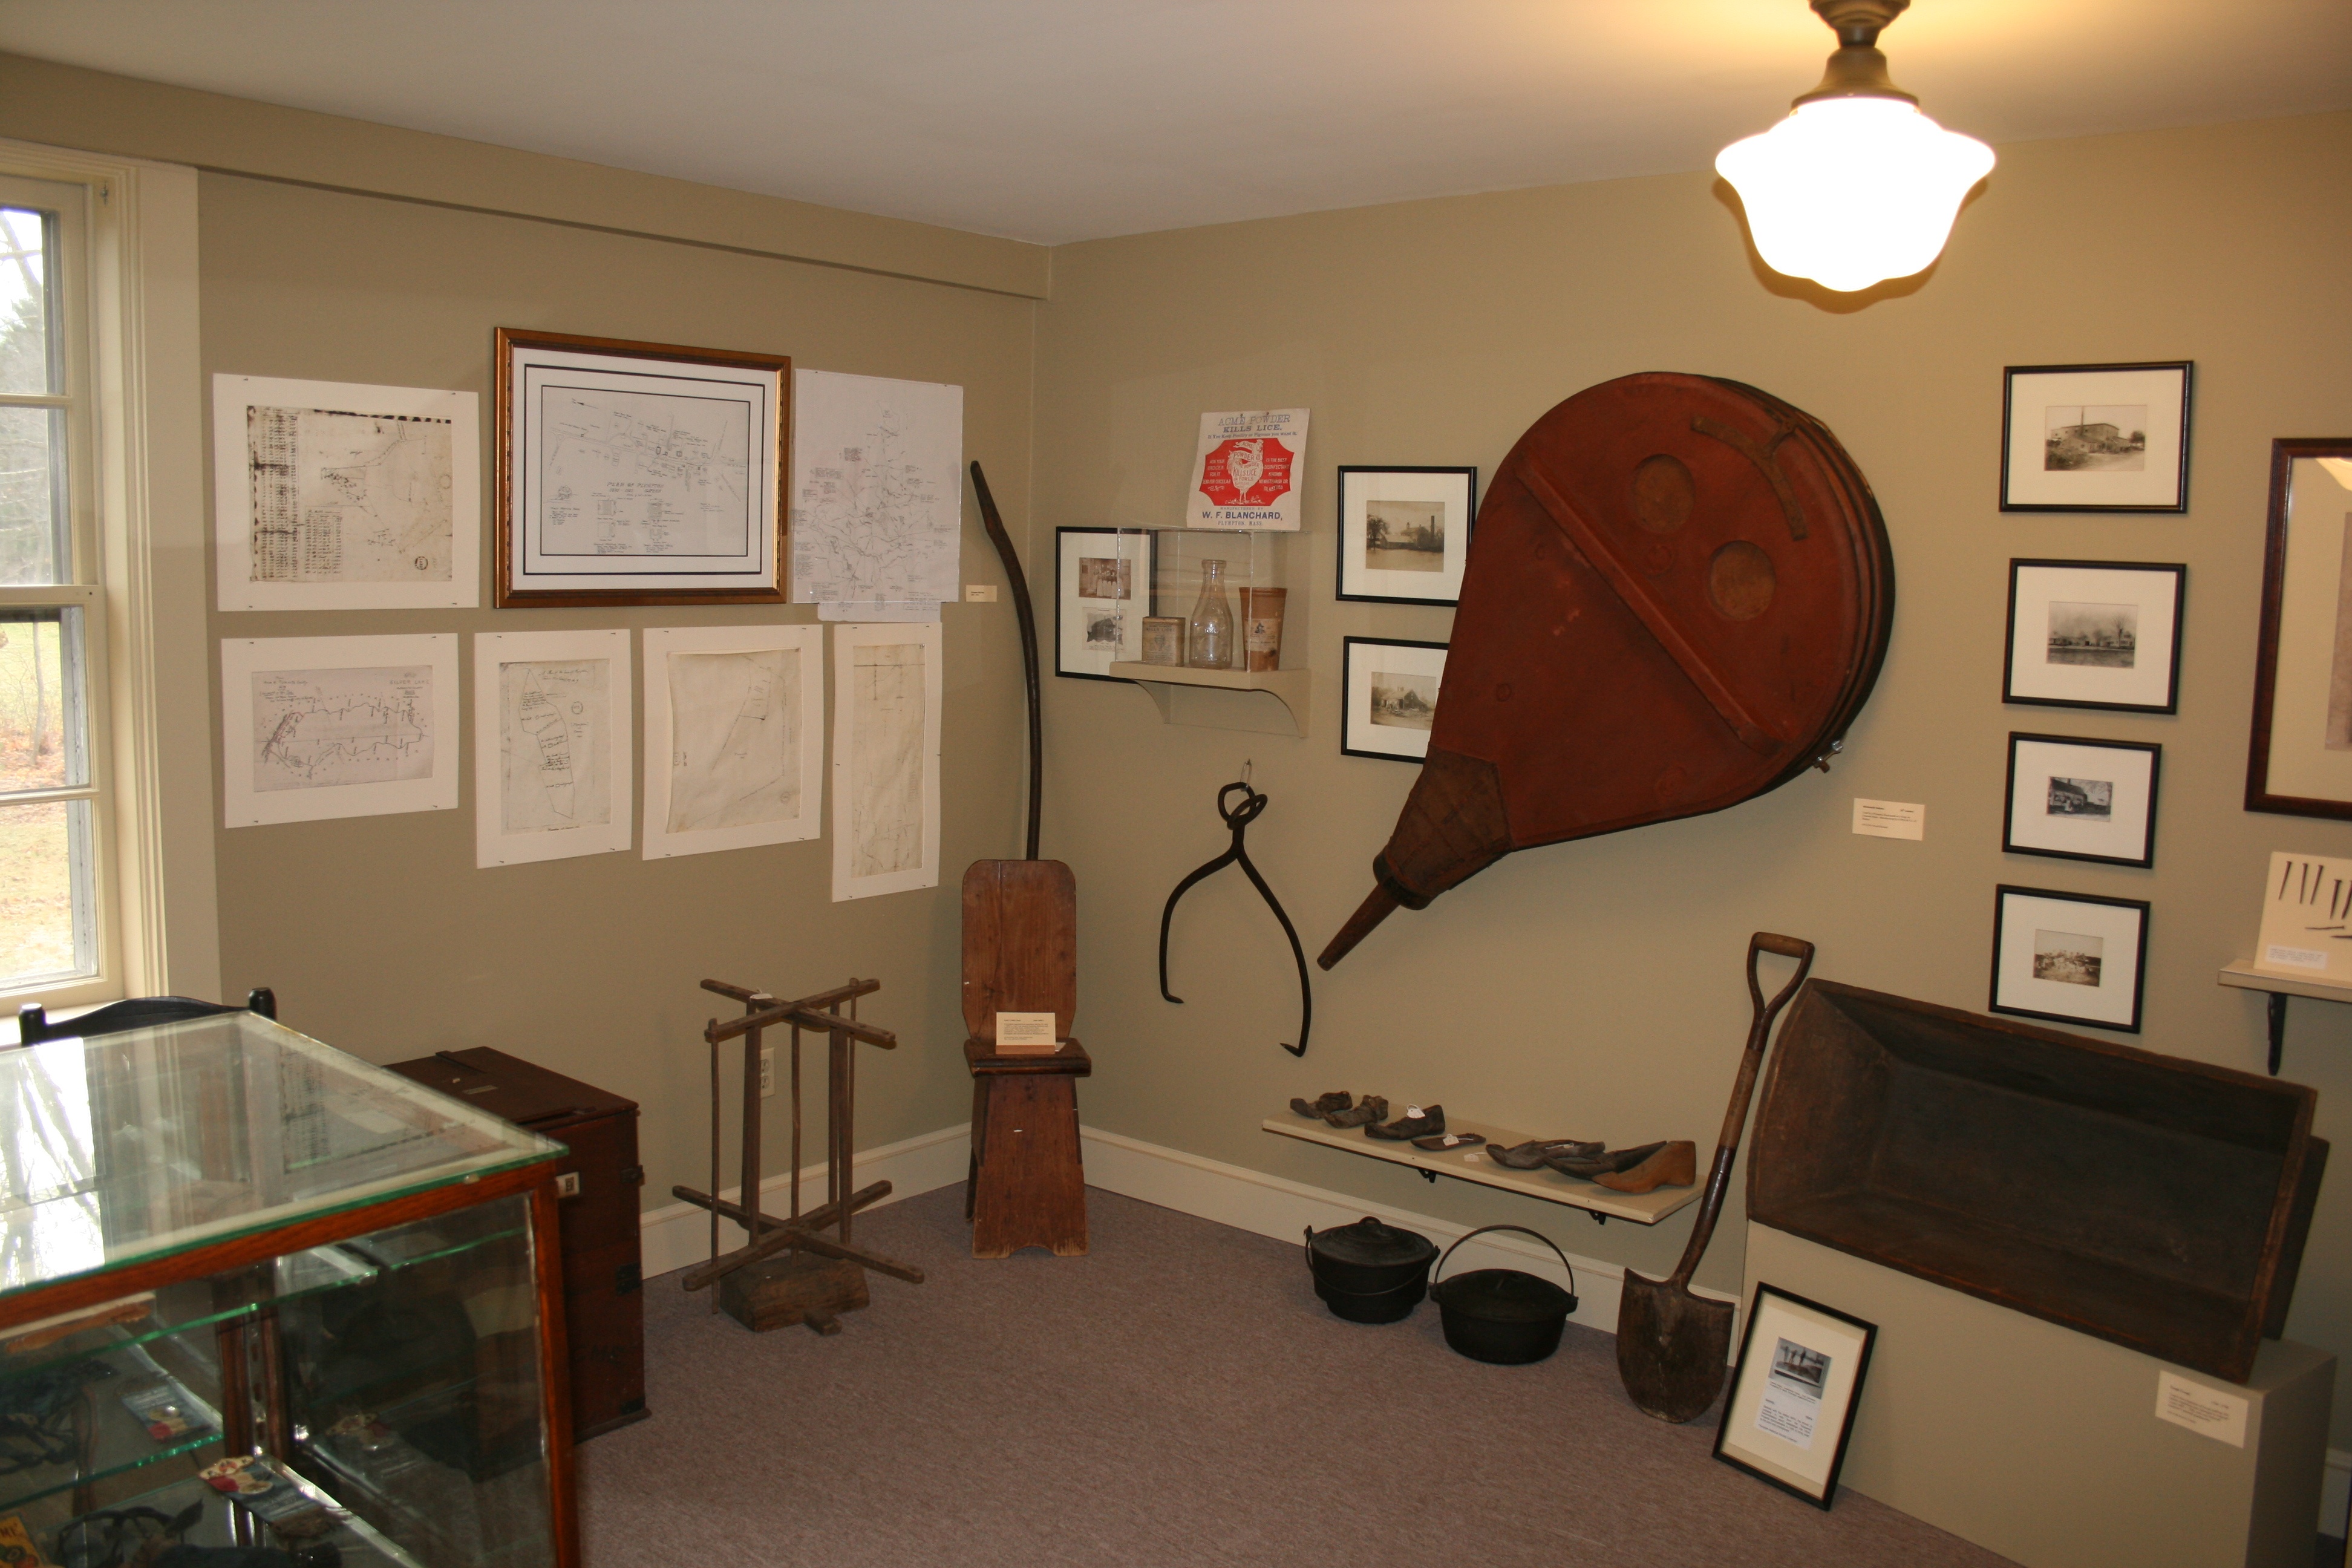 Inside the museum room